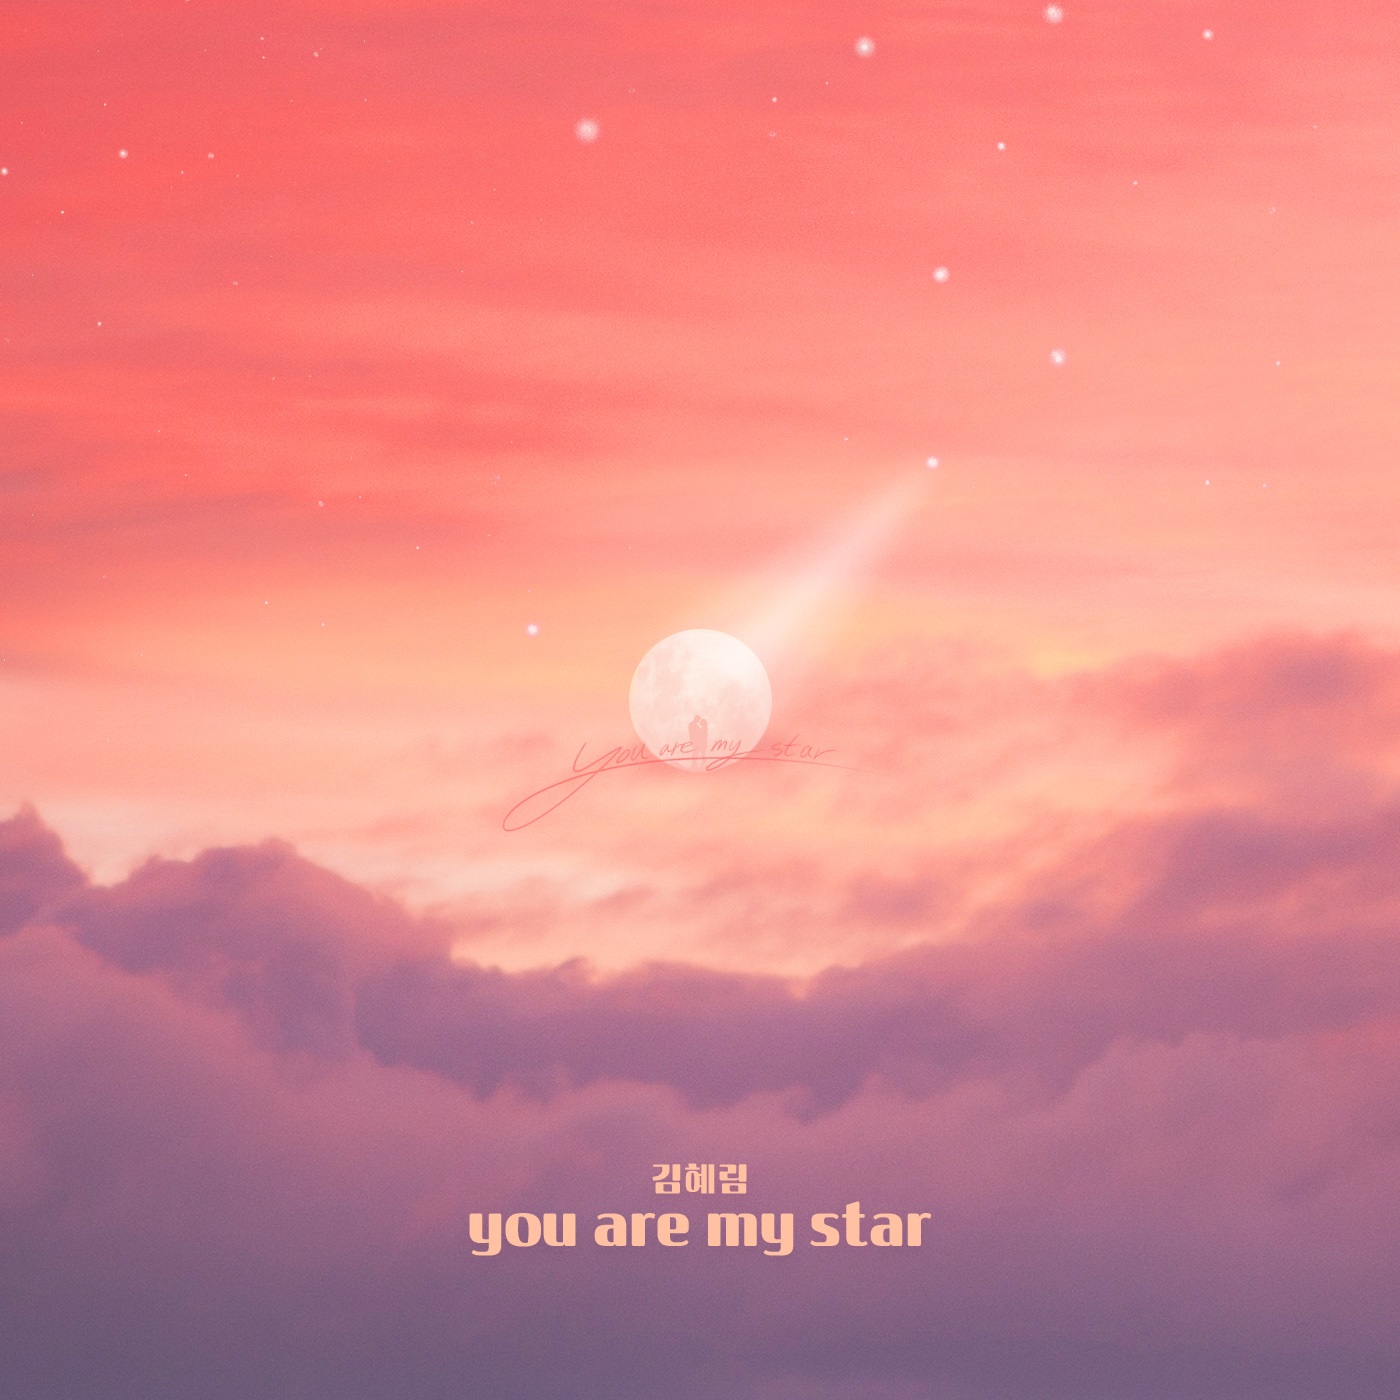 You are my starlight. You are my Star. You are a Star. You are my Stars обои. Вентилятор you are my Star.